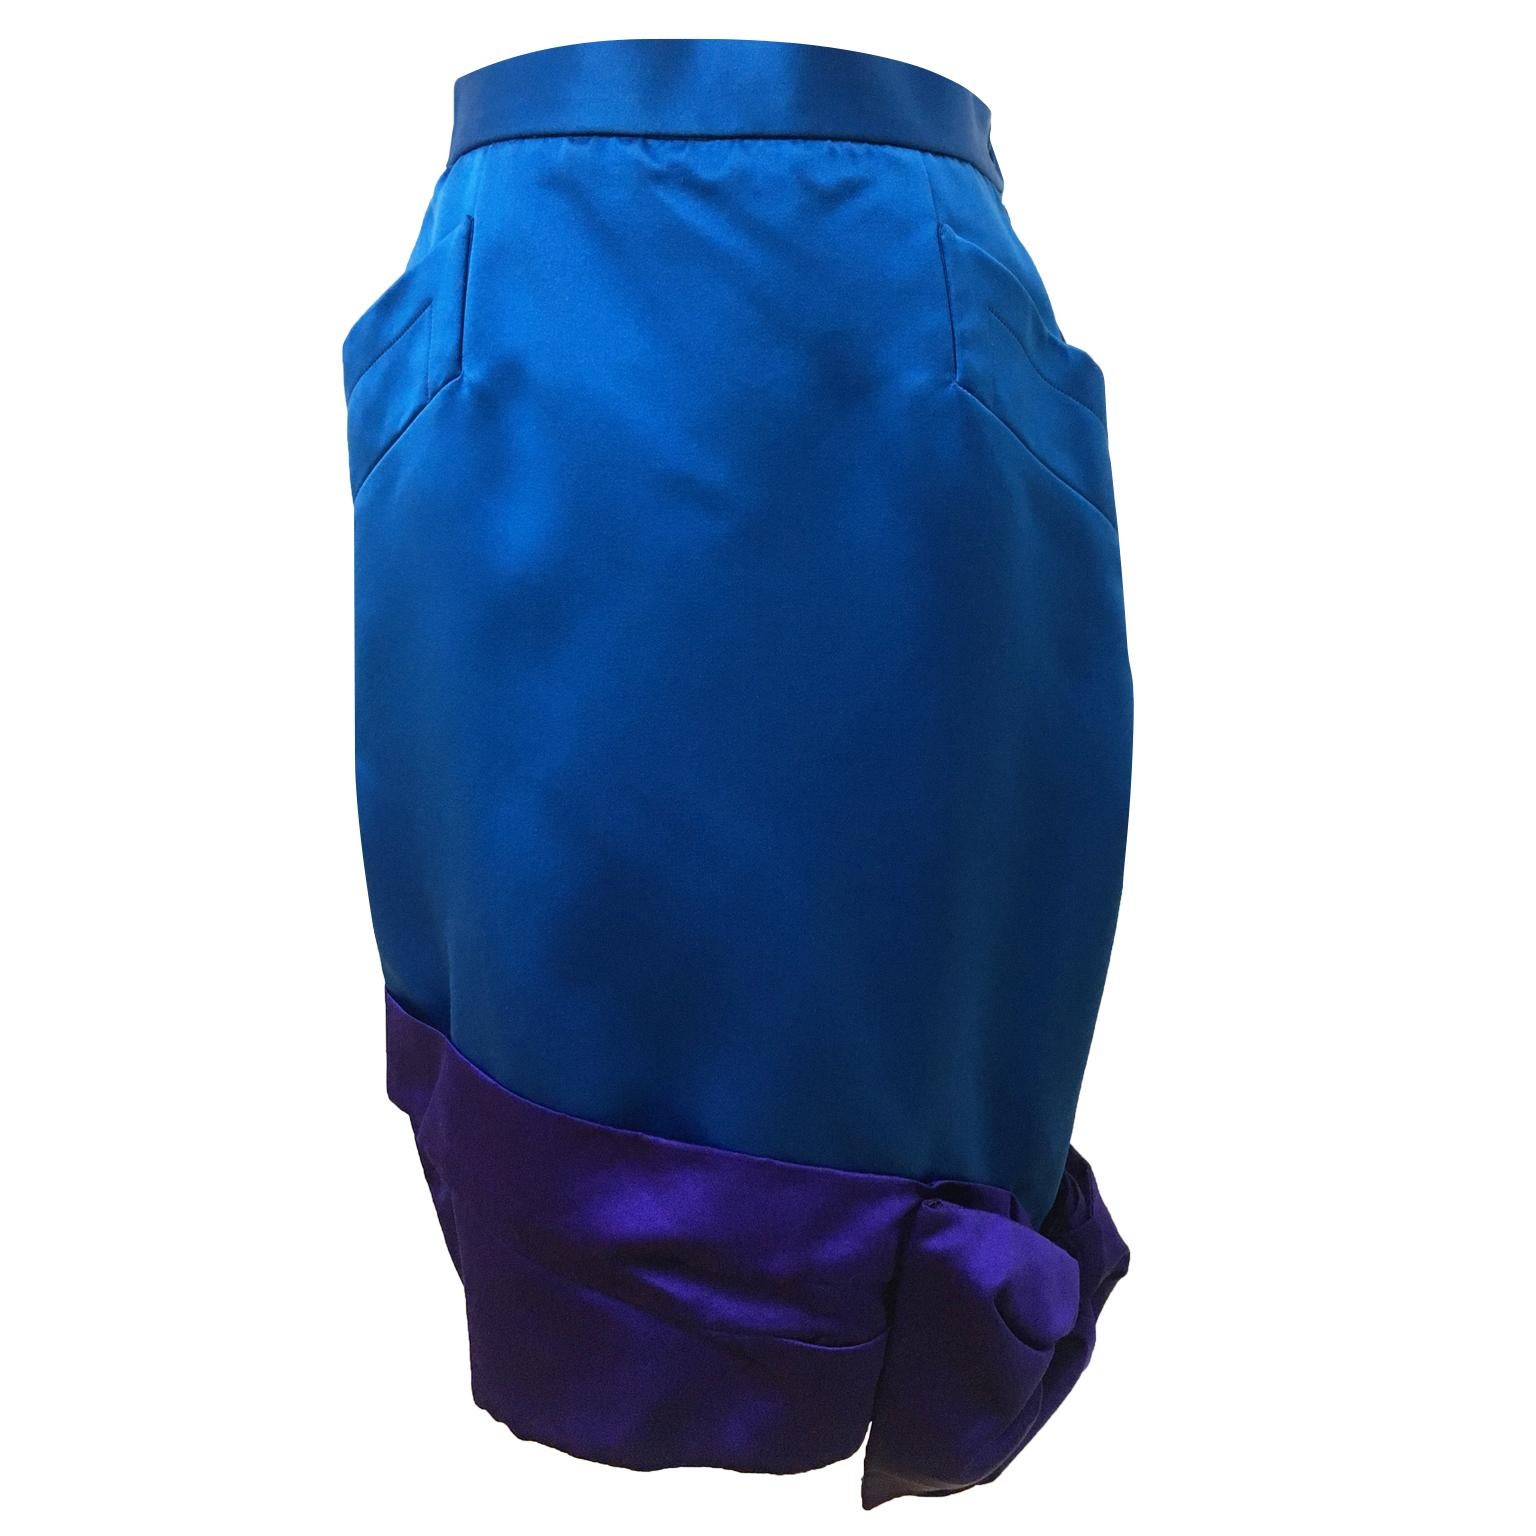 YSL Rive Gauche incredible blue / purple skirt from circa 1985.
Draped oversized bow hem detail. The skirt fastens with side zip. 
Original size : 38 FR 